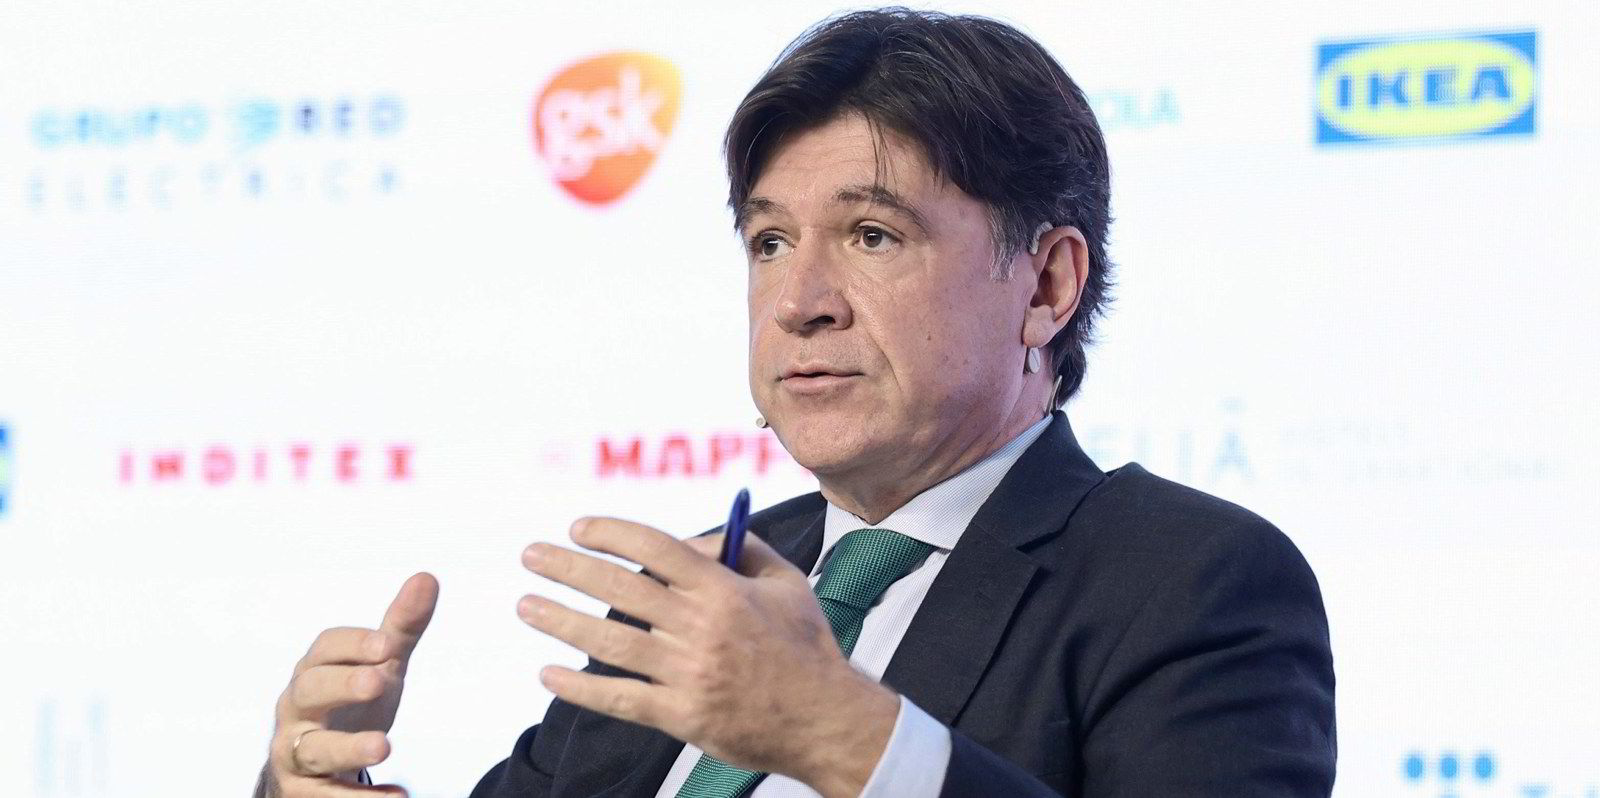 Continuity not revolution' at Iberdrola: Galán quizzed over Martínez  succession plan